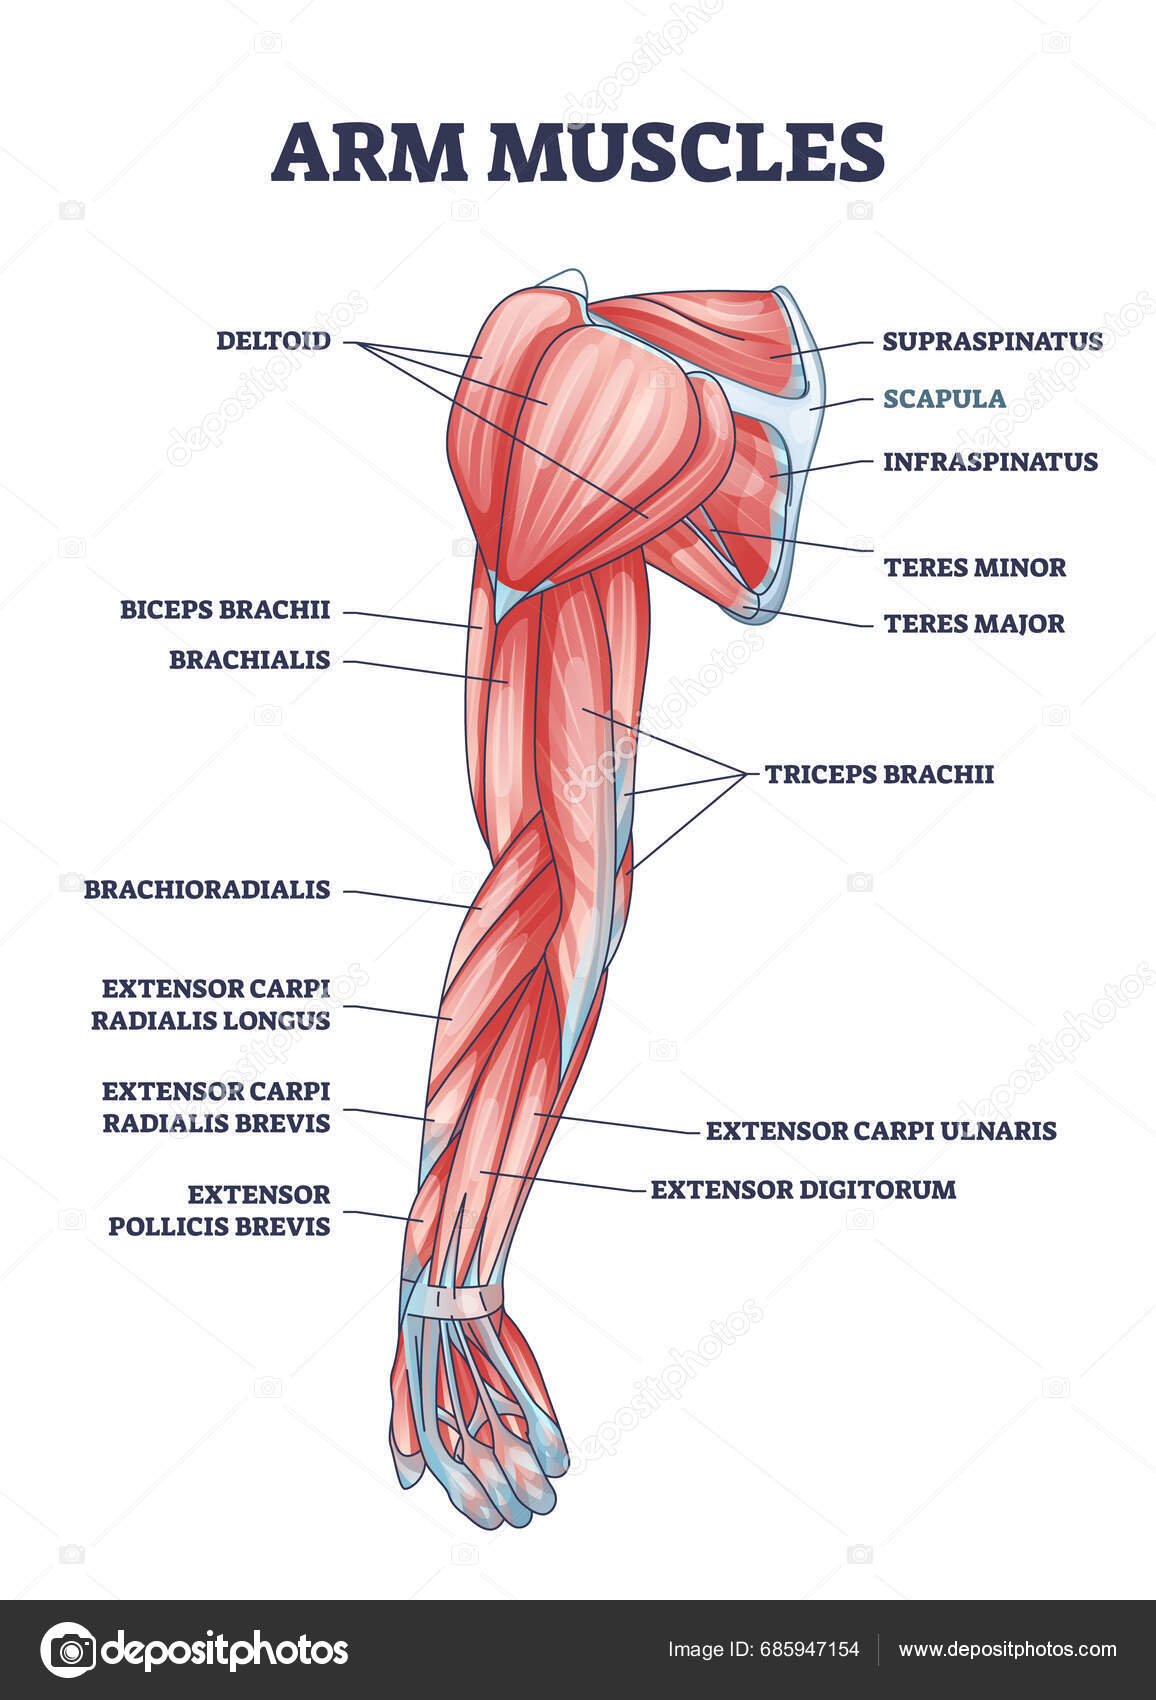 Arm muscles medical description with labeled latin titles outline diagram.  Educational scheme with physical muscular system vector illustration.  Deltoid, biceps, triceps and teres parts location.